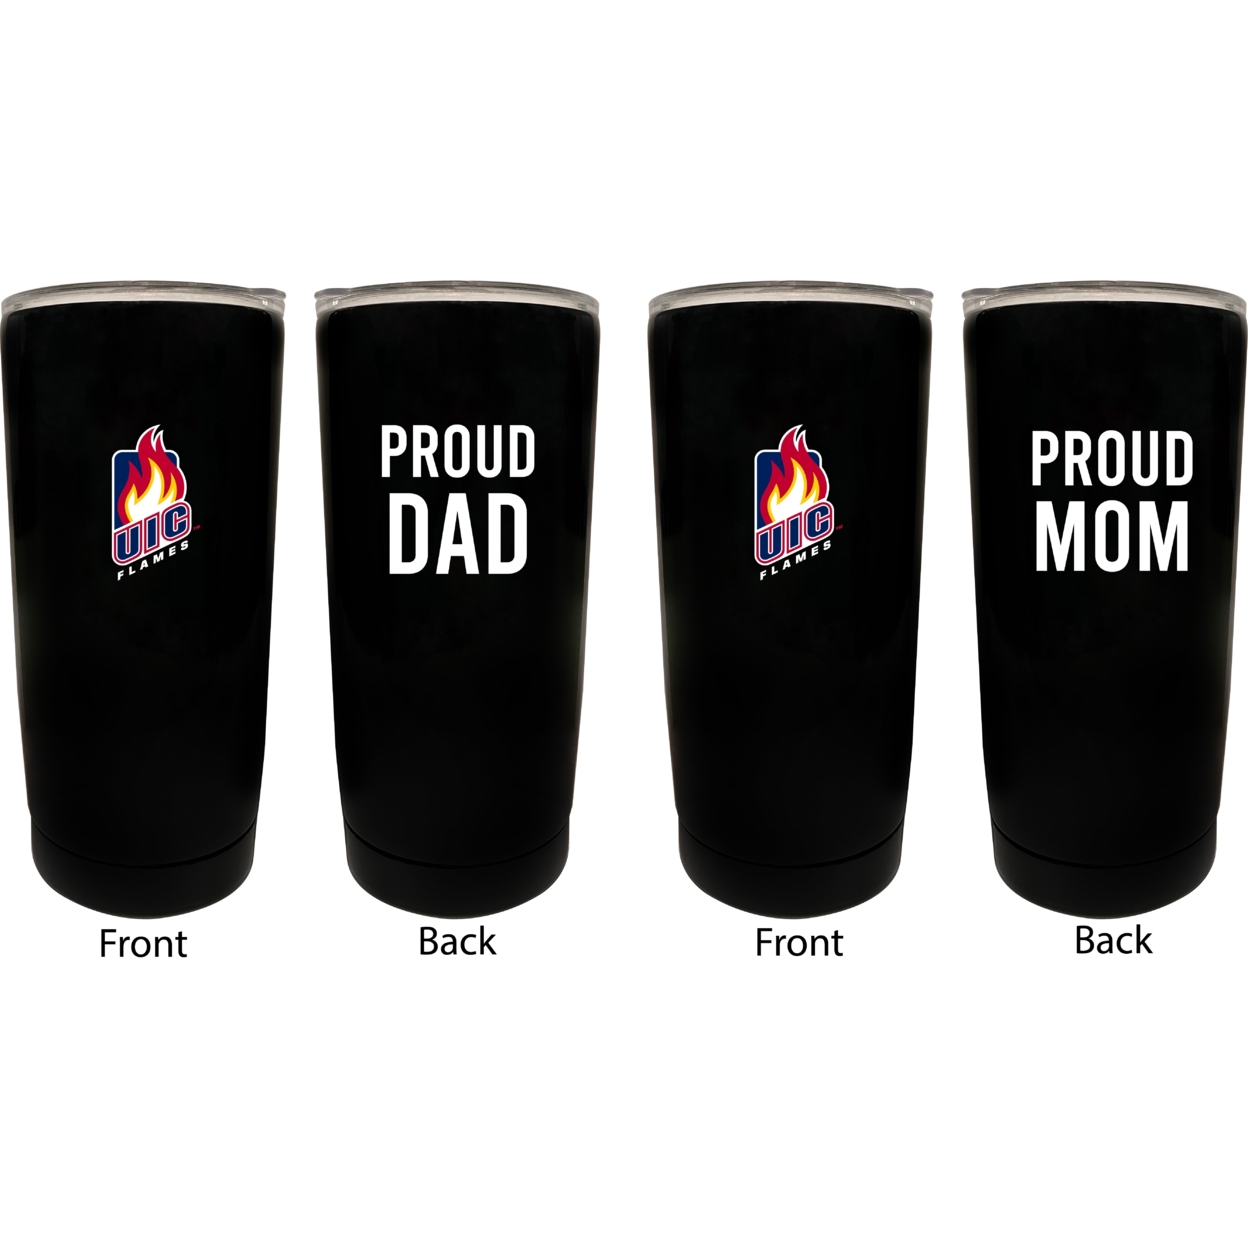 University Of Illinois At Chicago Proud Mom And Dad 16 Oz Insulated Stainless Steel Tumblers 2 Pack Black.